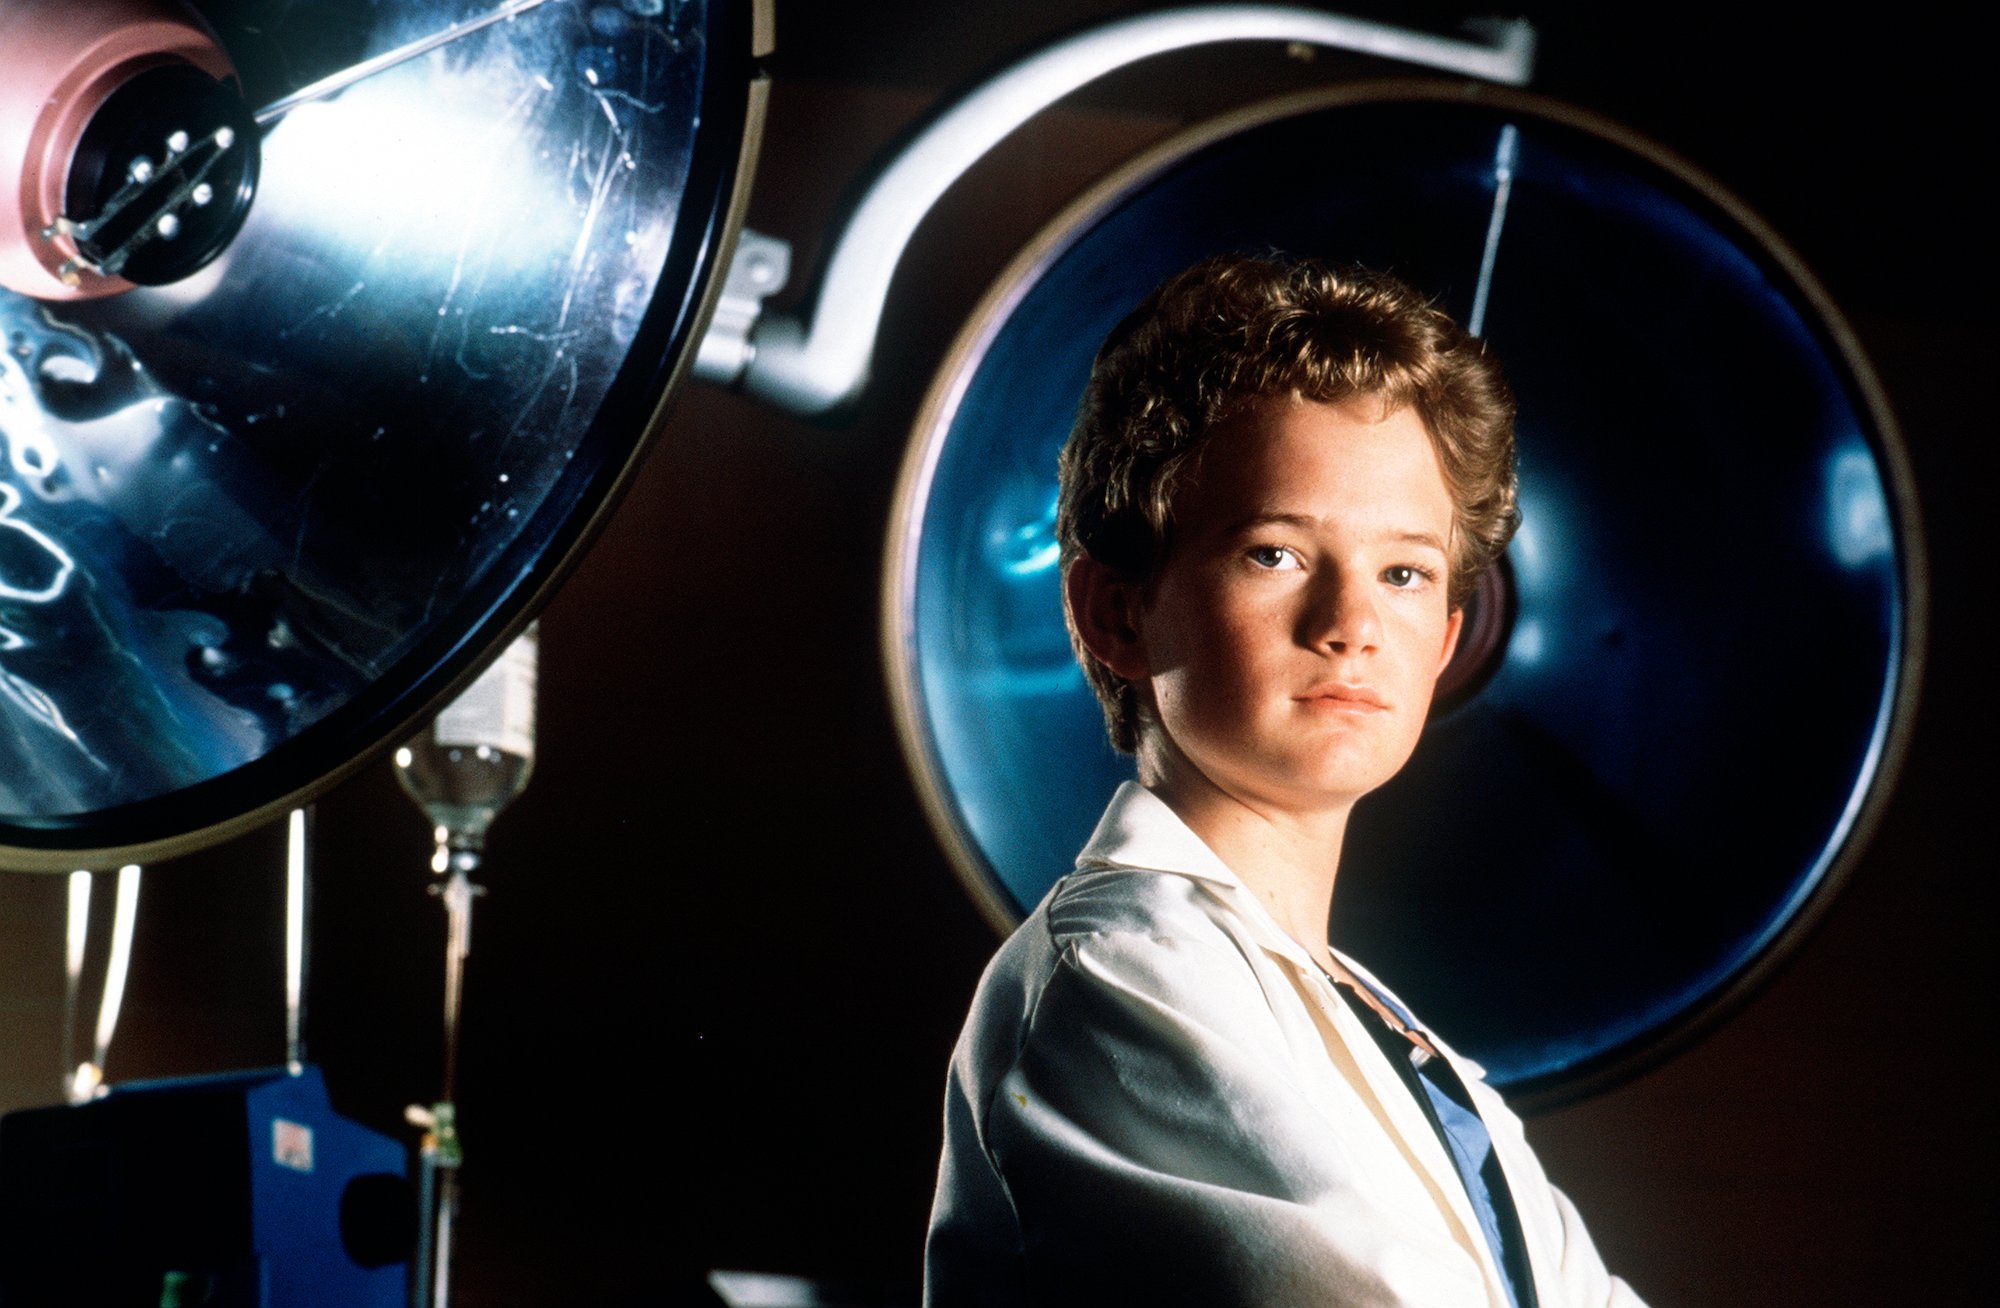 Neil Patrick Harris as Douglas "Doogie" Howser standing in front of medical equipment